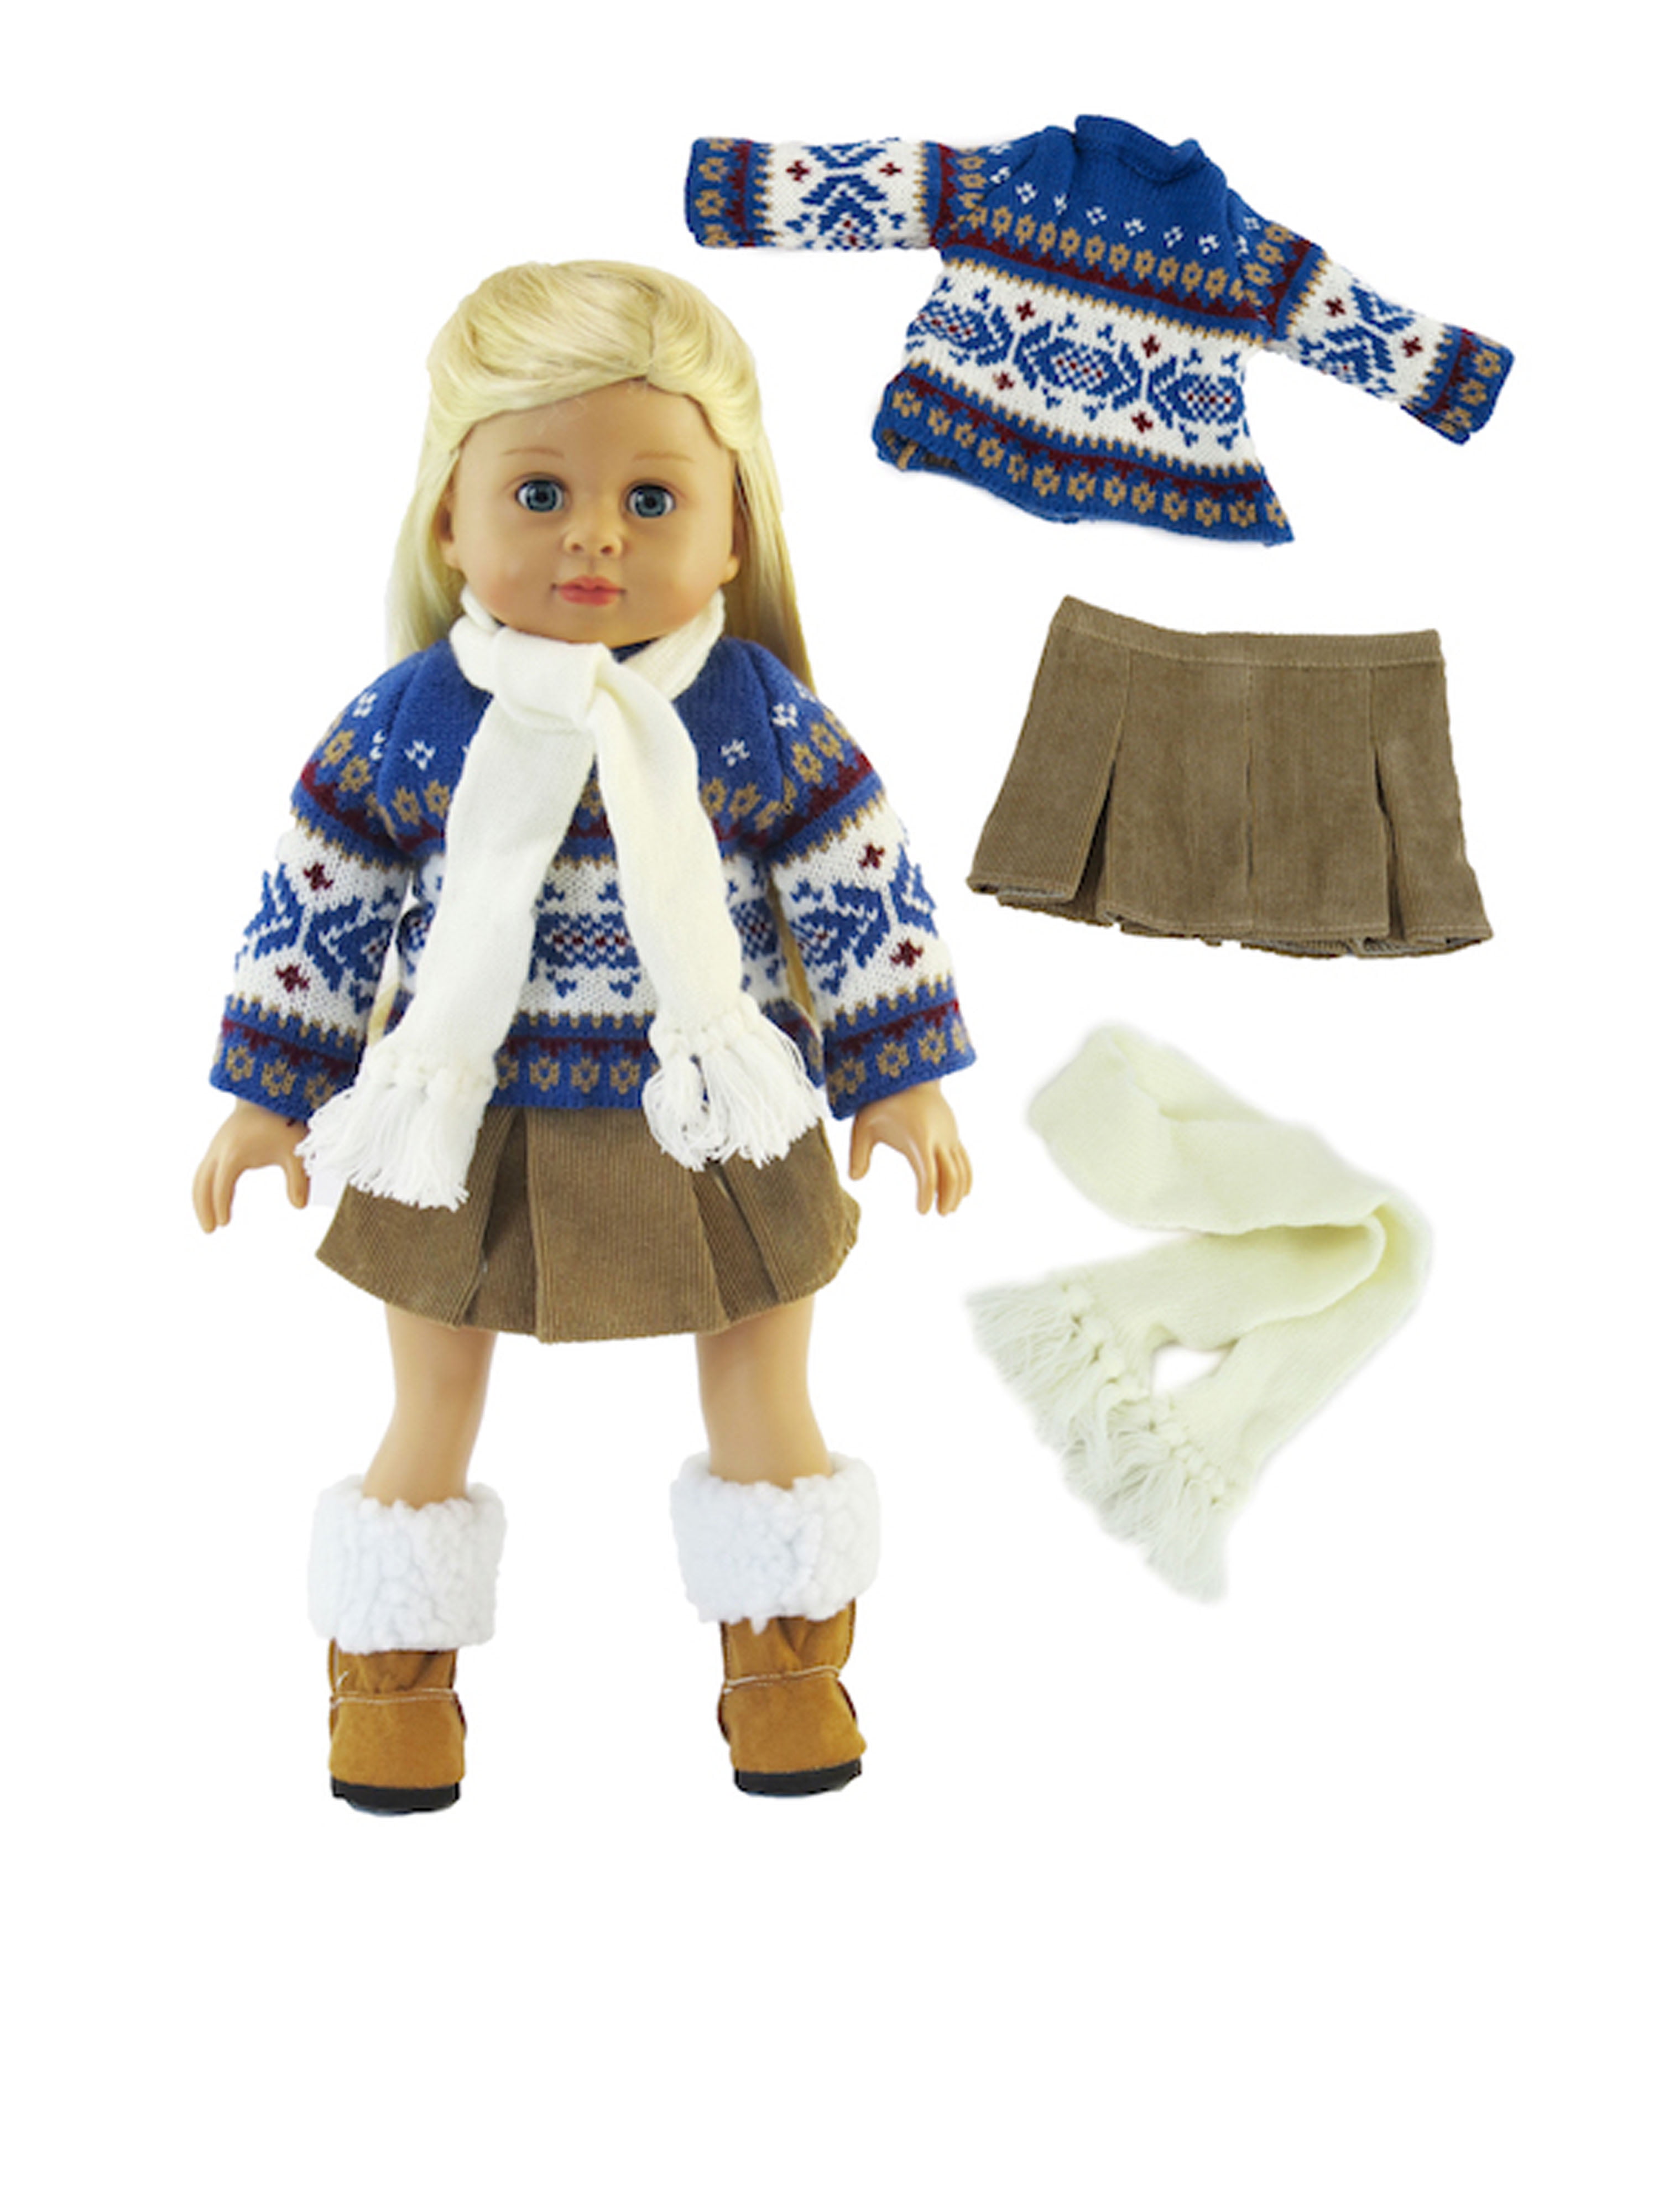 Cute Clothes Sweaters and Skirts Outfit Accessories Set for 18 Inch American Girl Doll Accessories Girl Gift Toy Fashion Doll Clothes